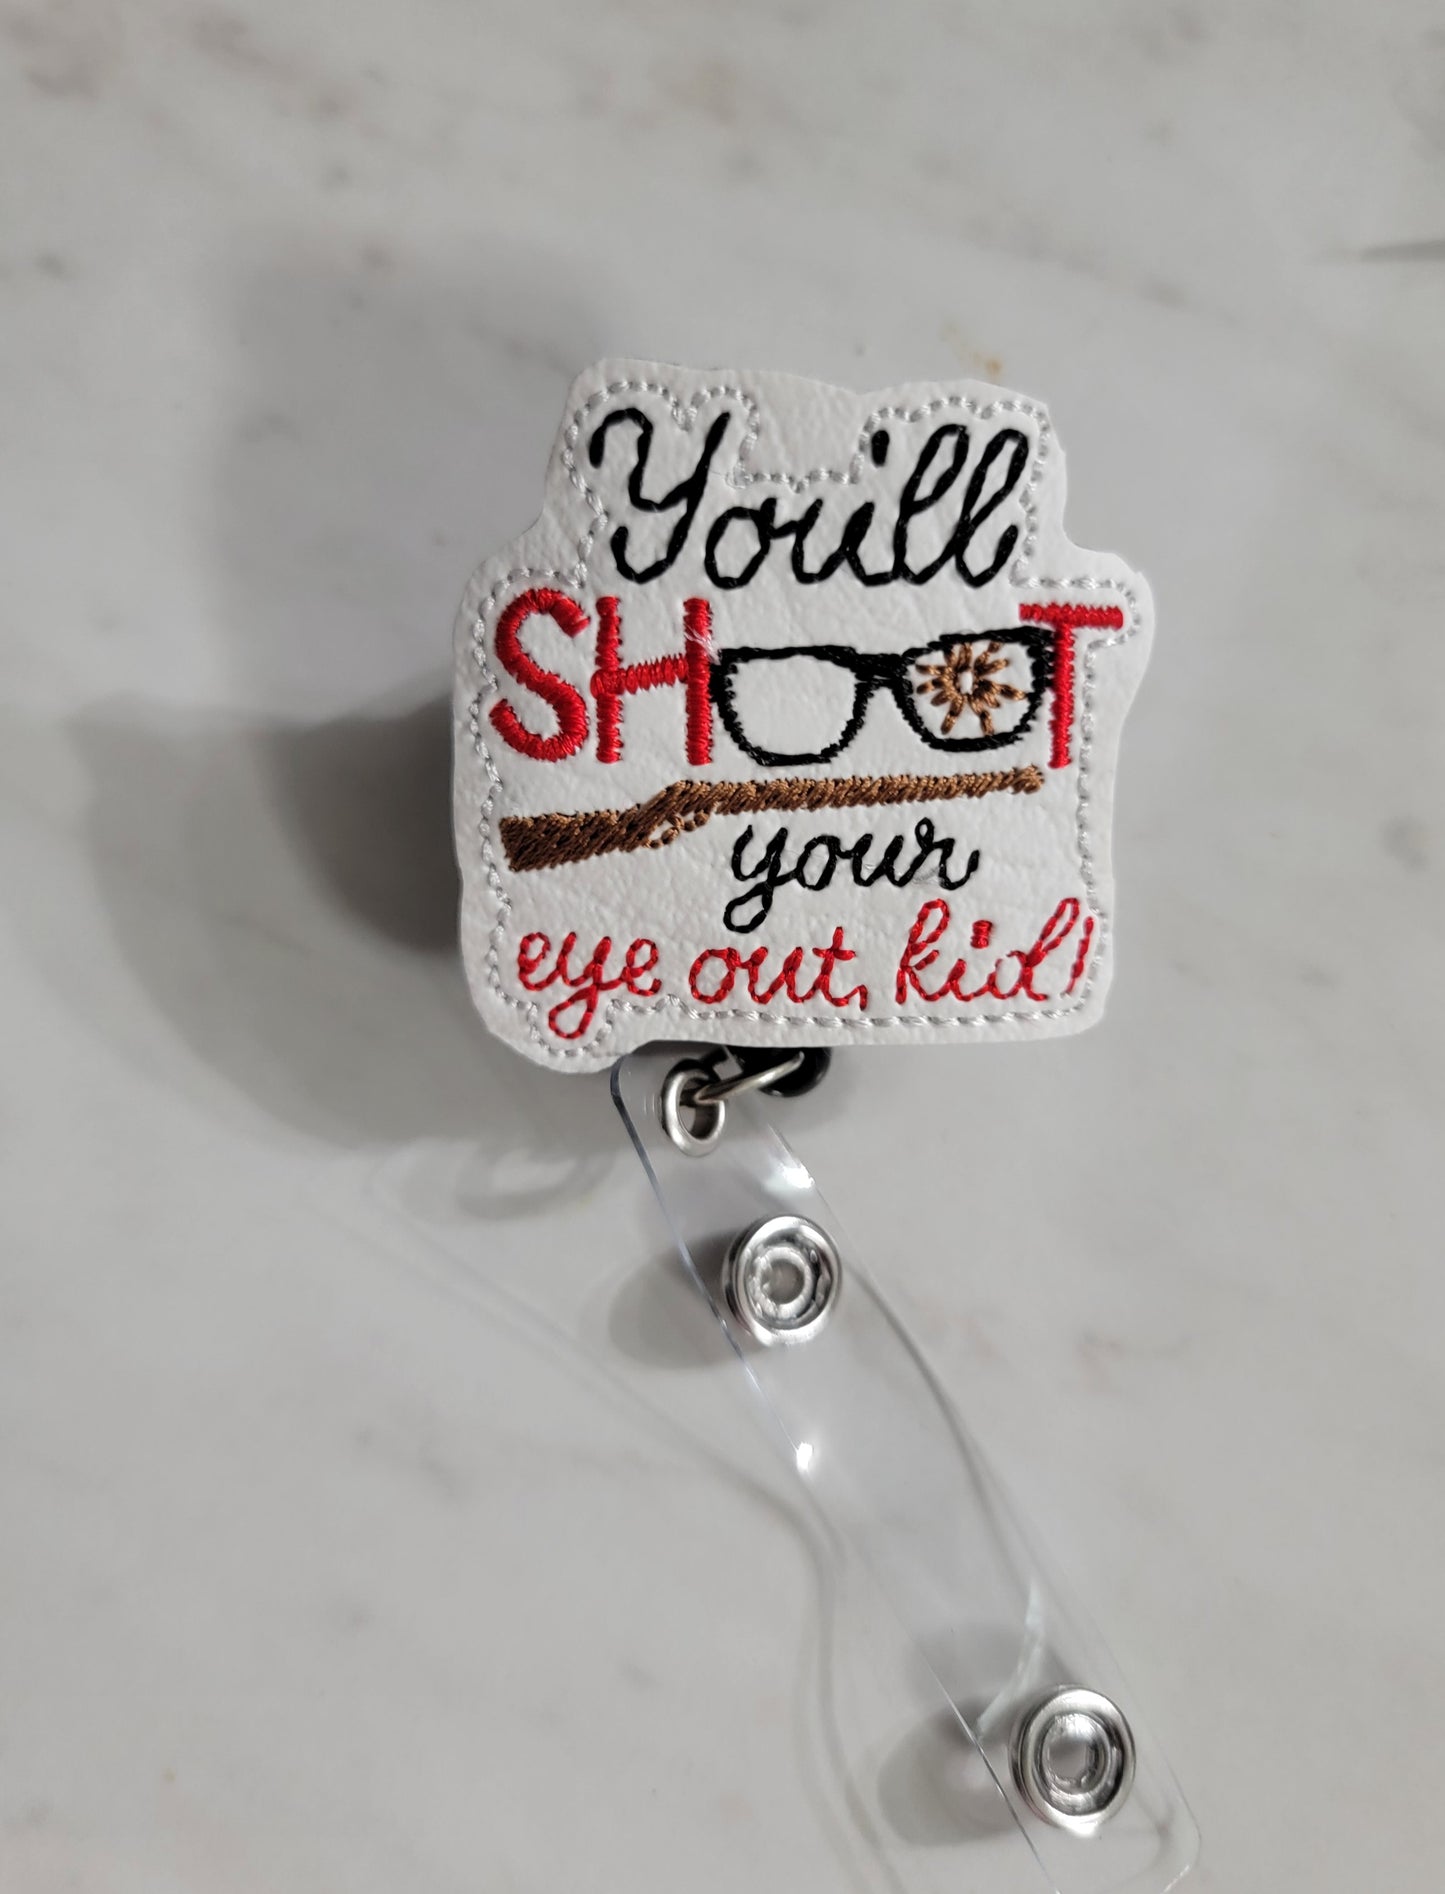 Shoot your eye out Badge Reel